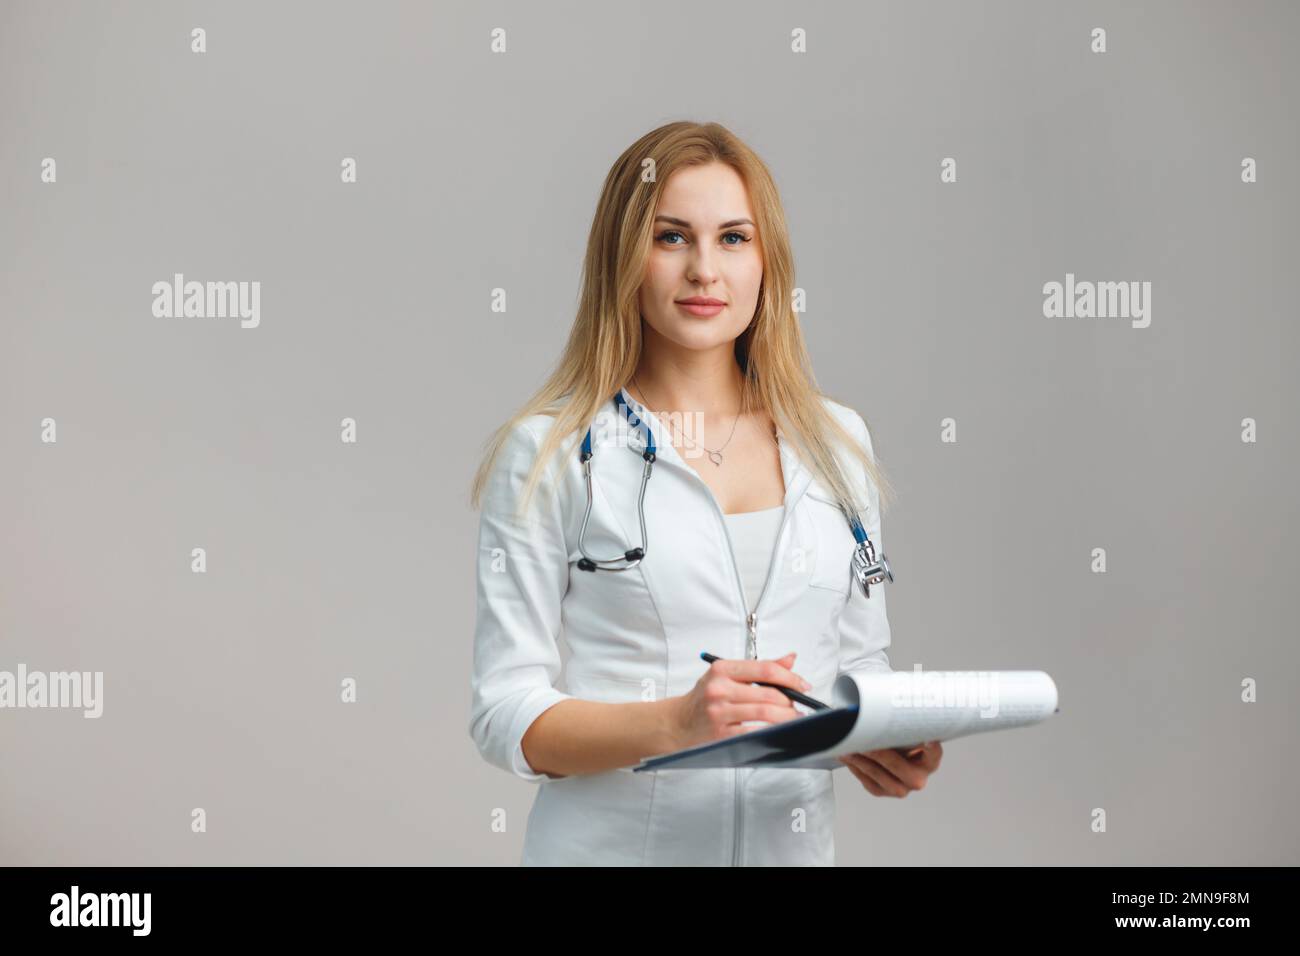 Young European Female Doctor Portrait with stethoscope and folder wearing white robe. Portrait on plain background. Appointment Stock Photo